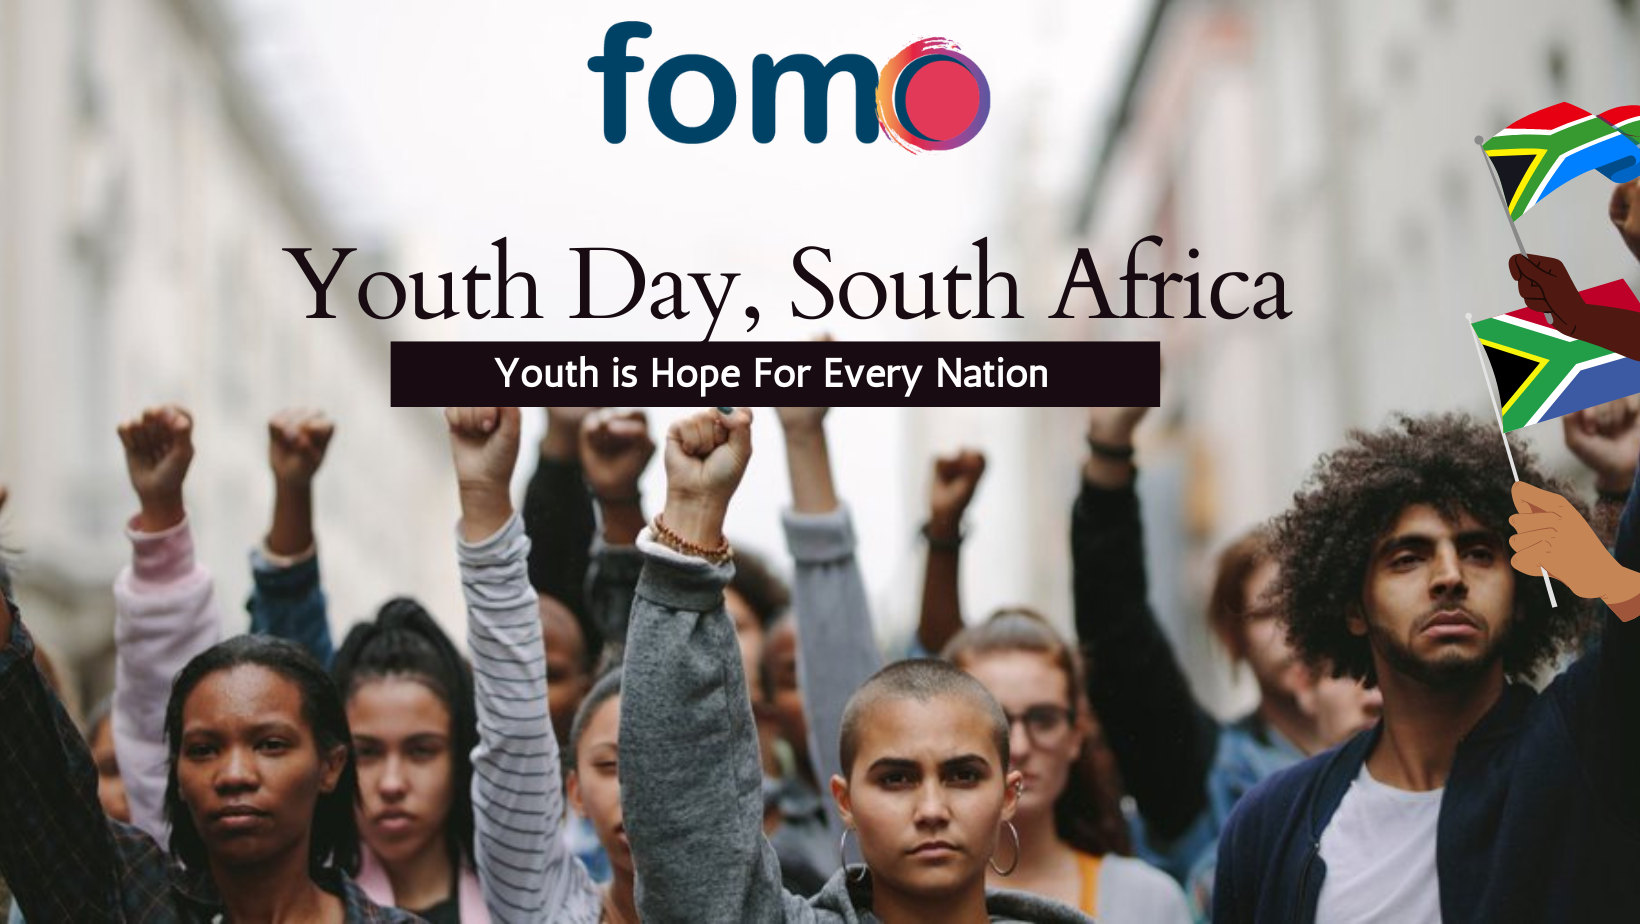 Facts About Youth Day South Africa Fomo